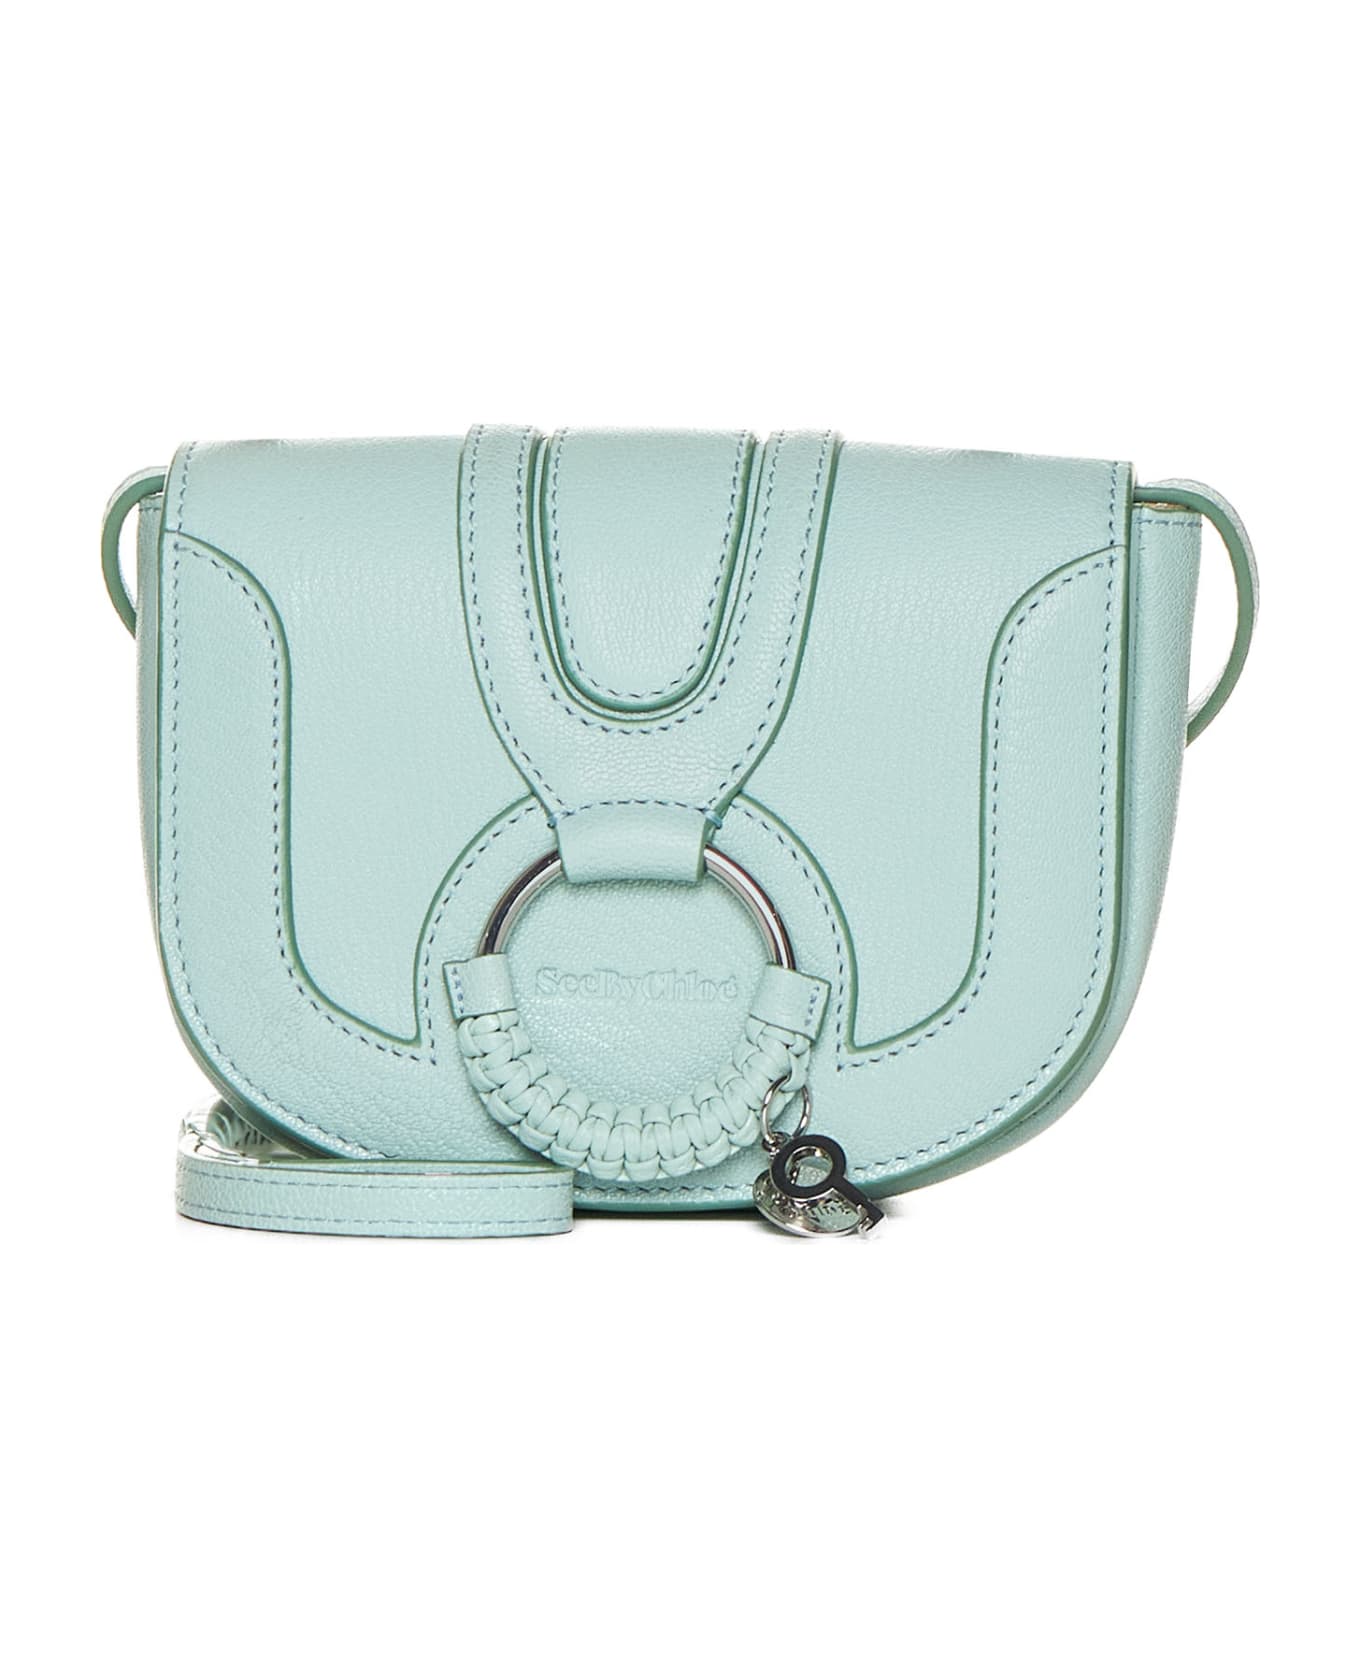 See by Chloé Shoulder Bag - Blowy blue トートバッグ